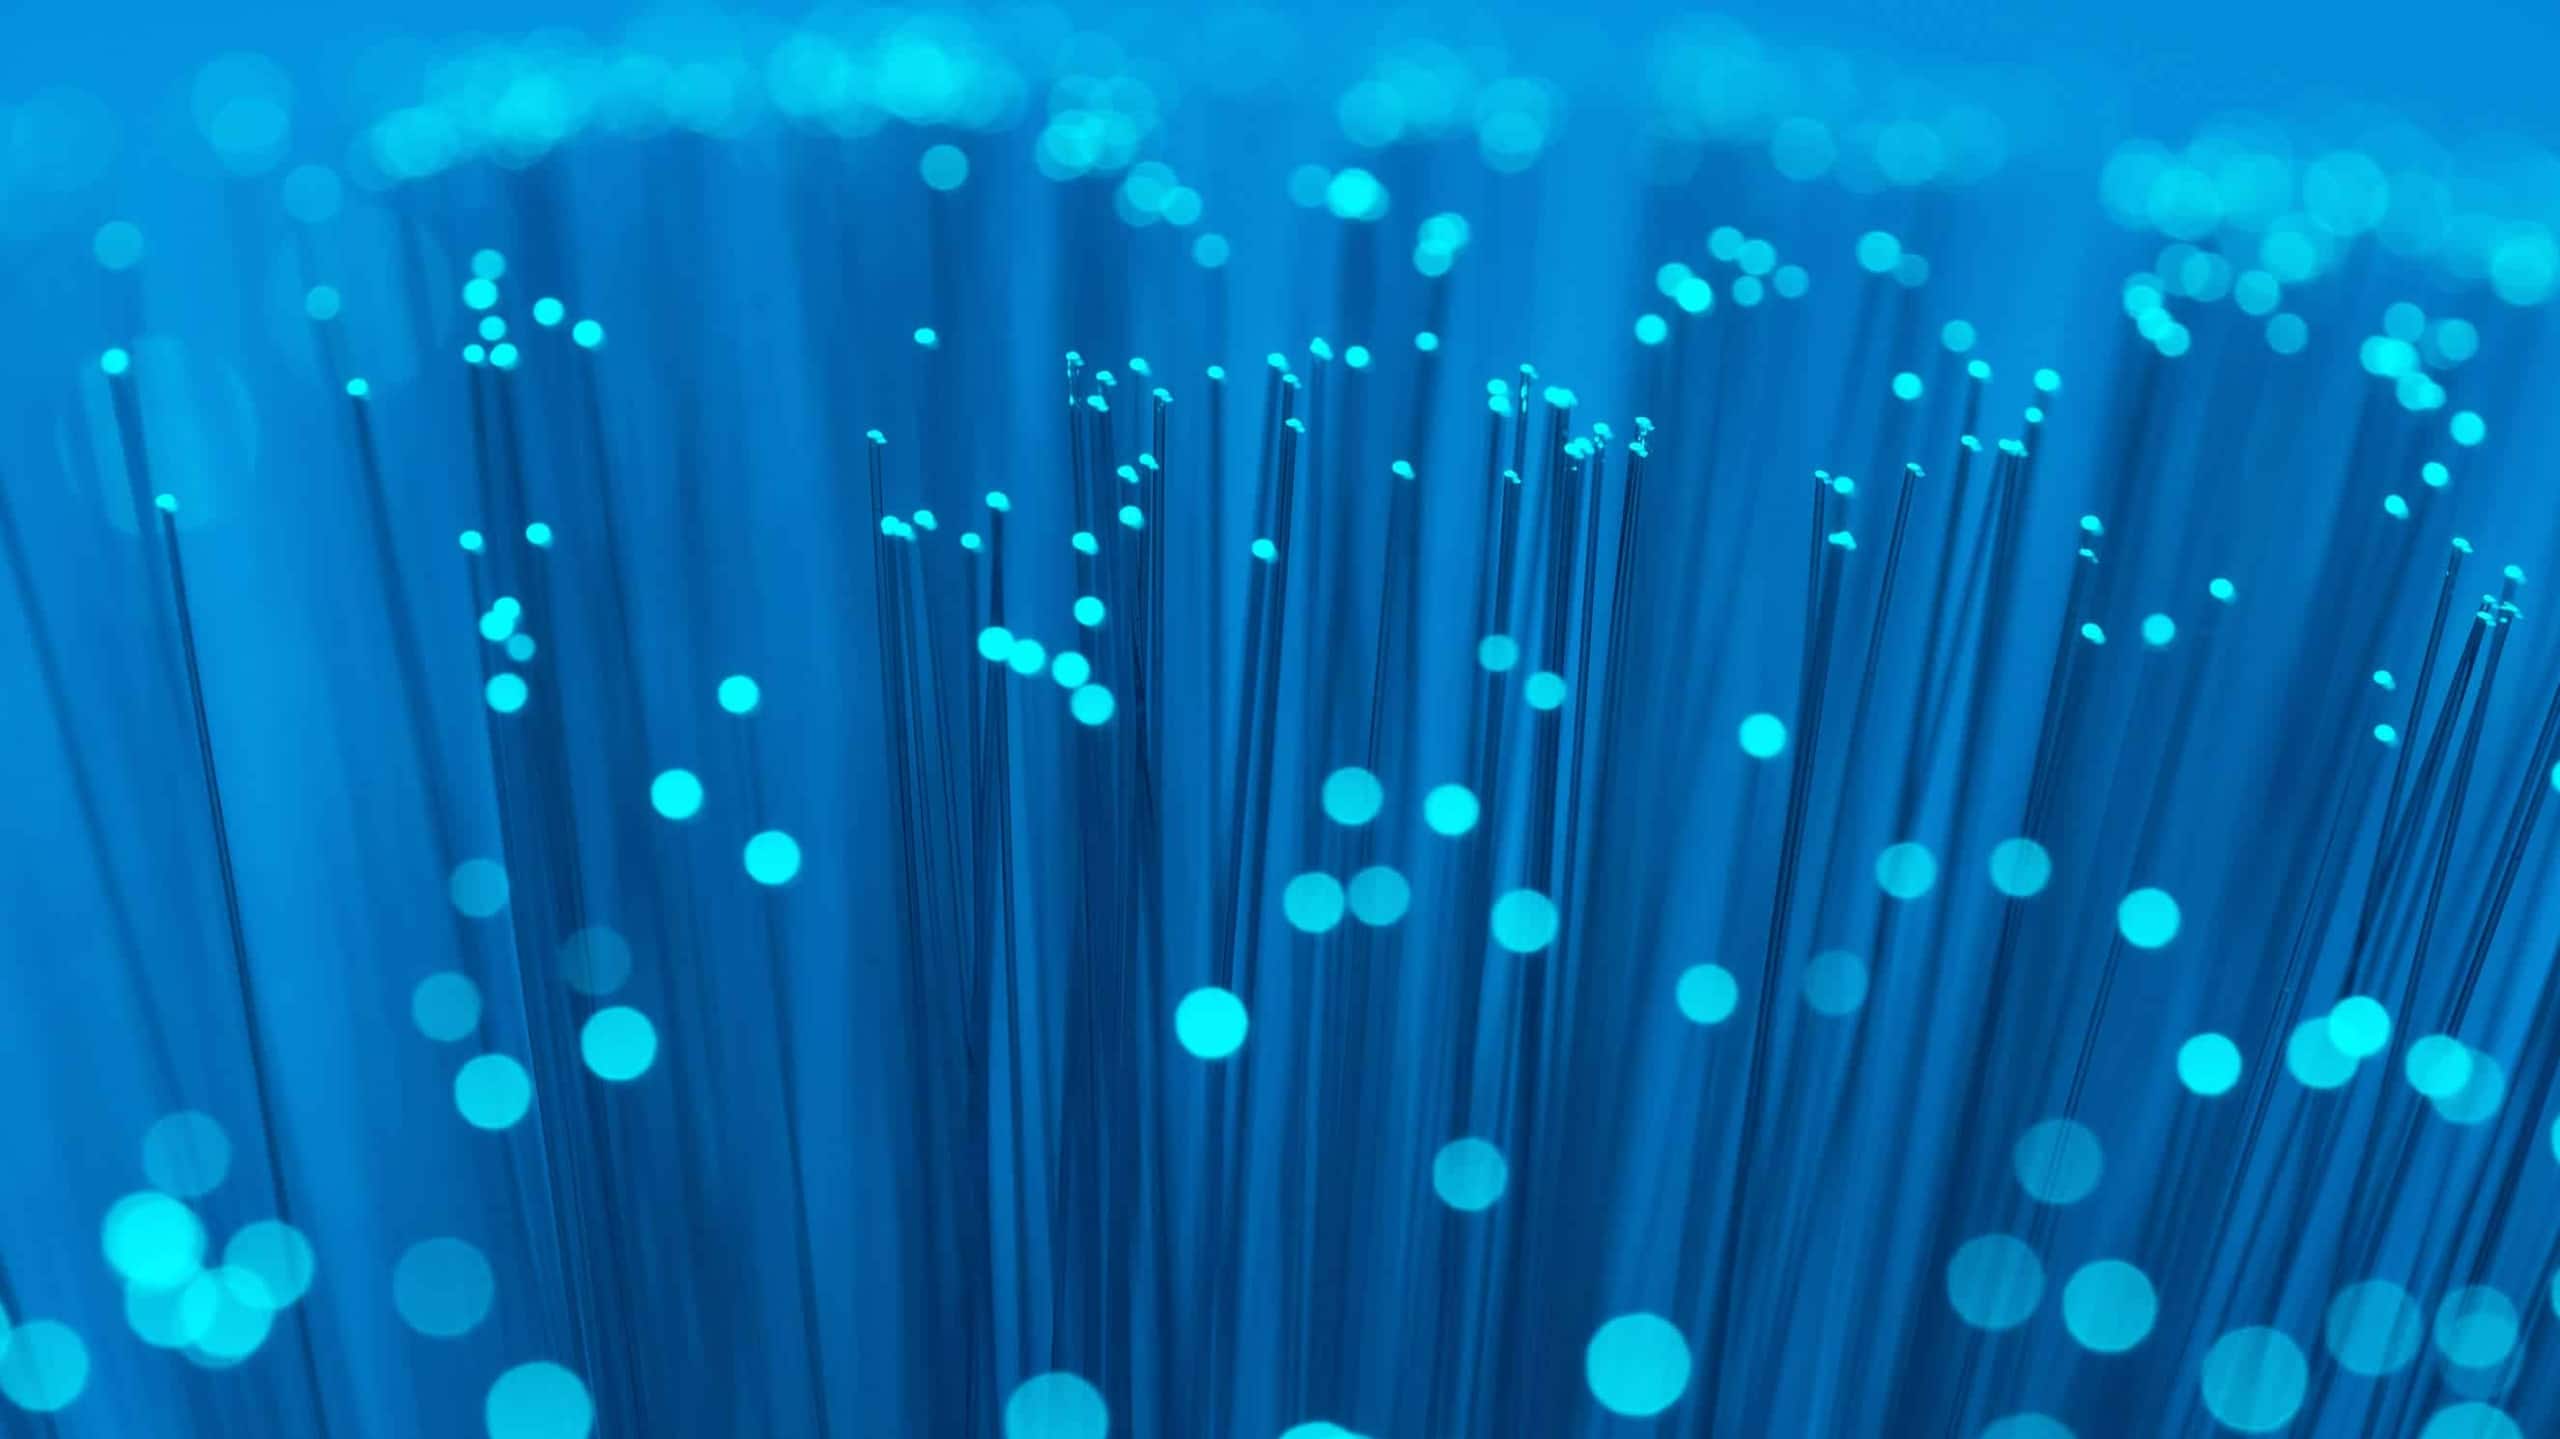 A close-up view of numerous fiber optic cables illuminated in blue, showing glowing tips where light is visible, against a deep blue background.